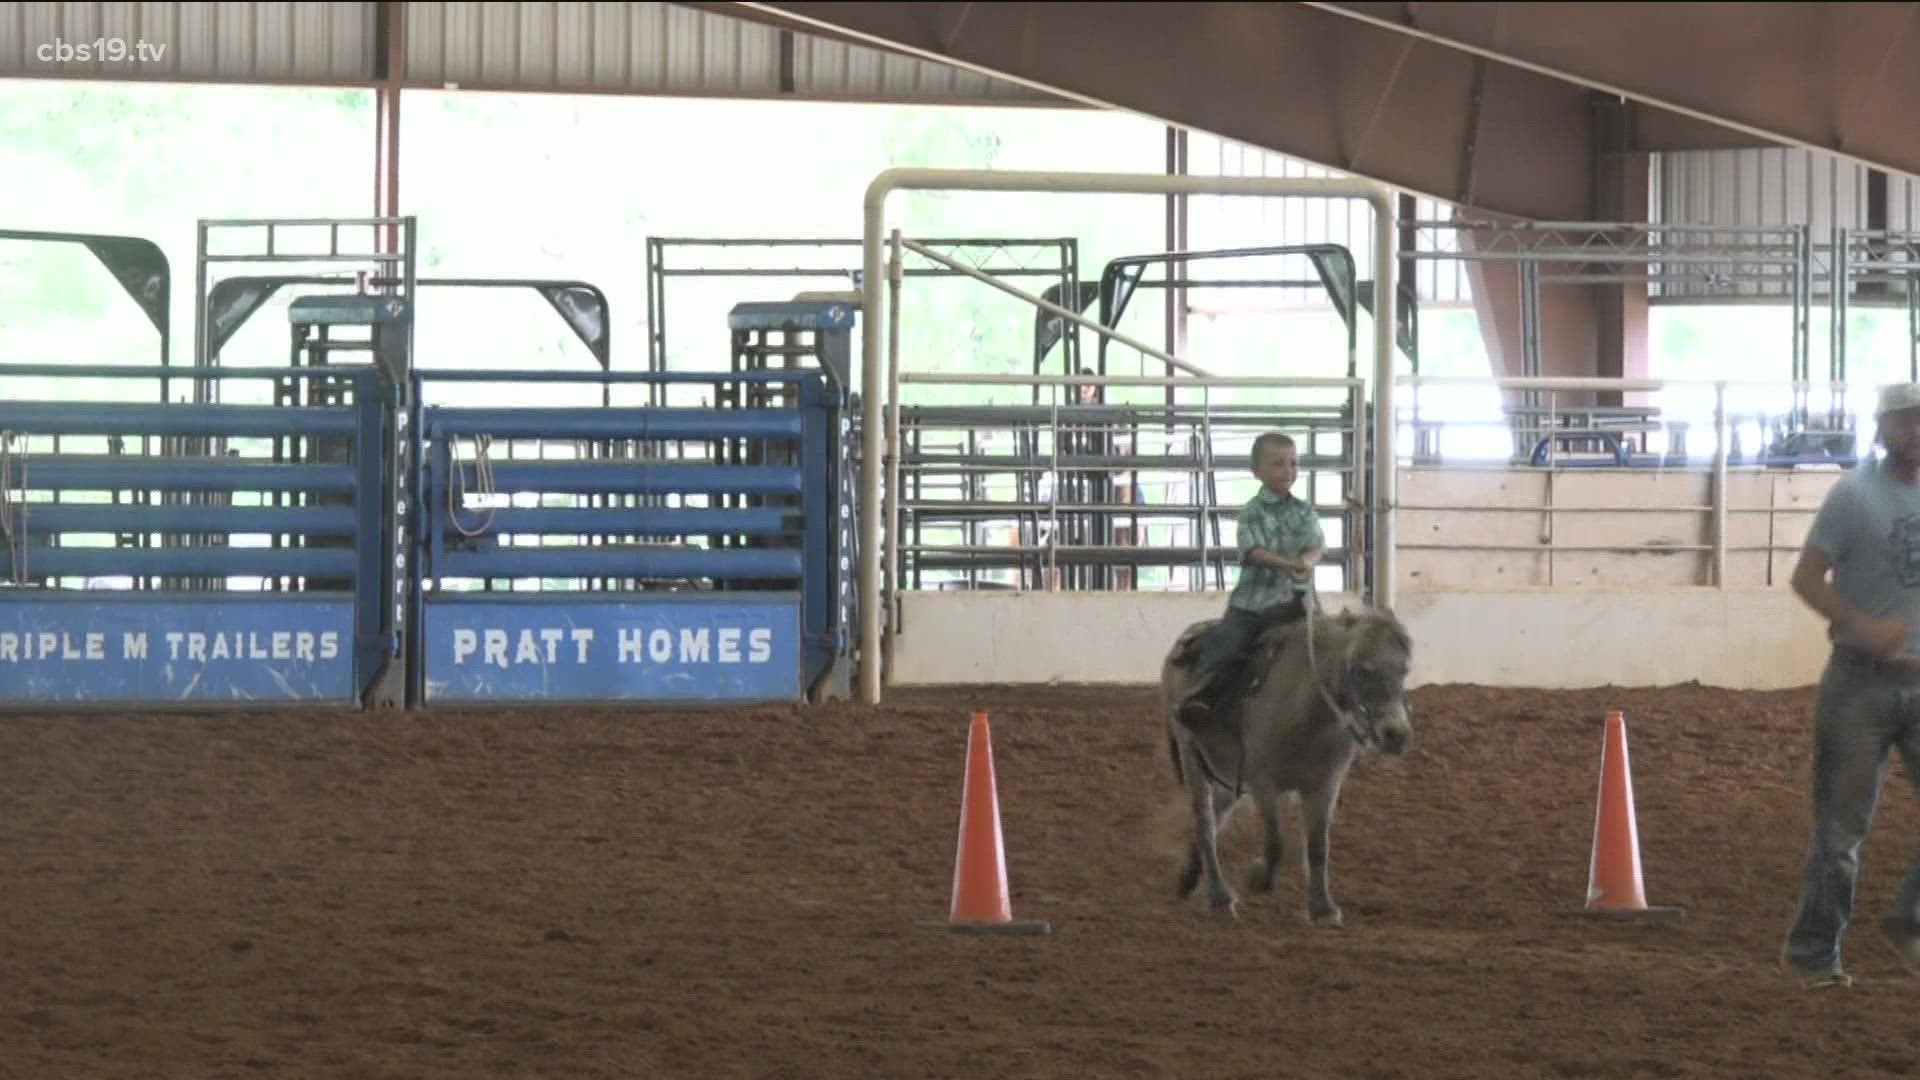 Local church hosts rodeo to encourage people's faith, the cowboy lifestyle